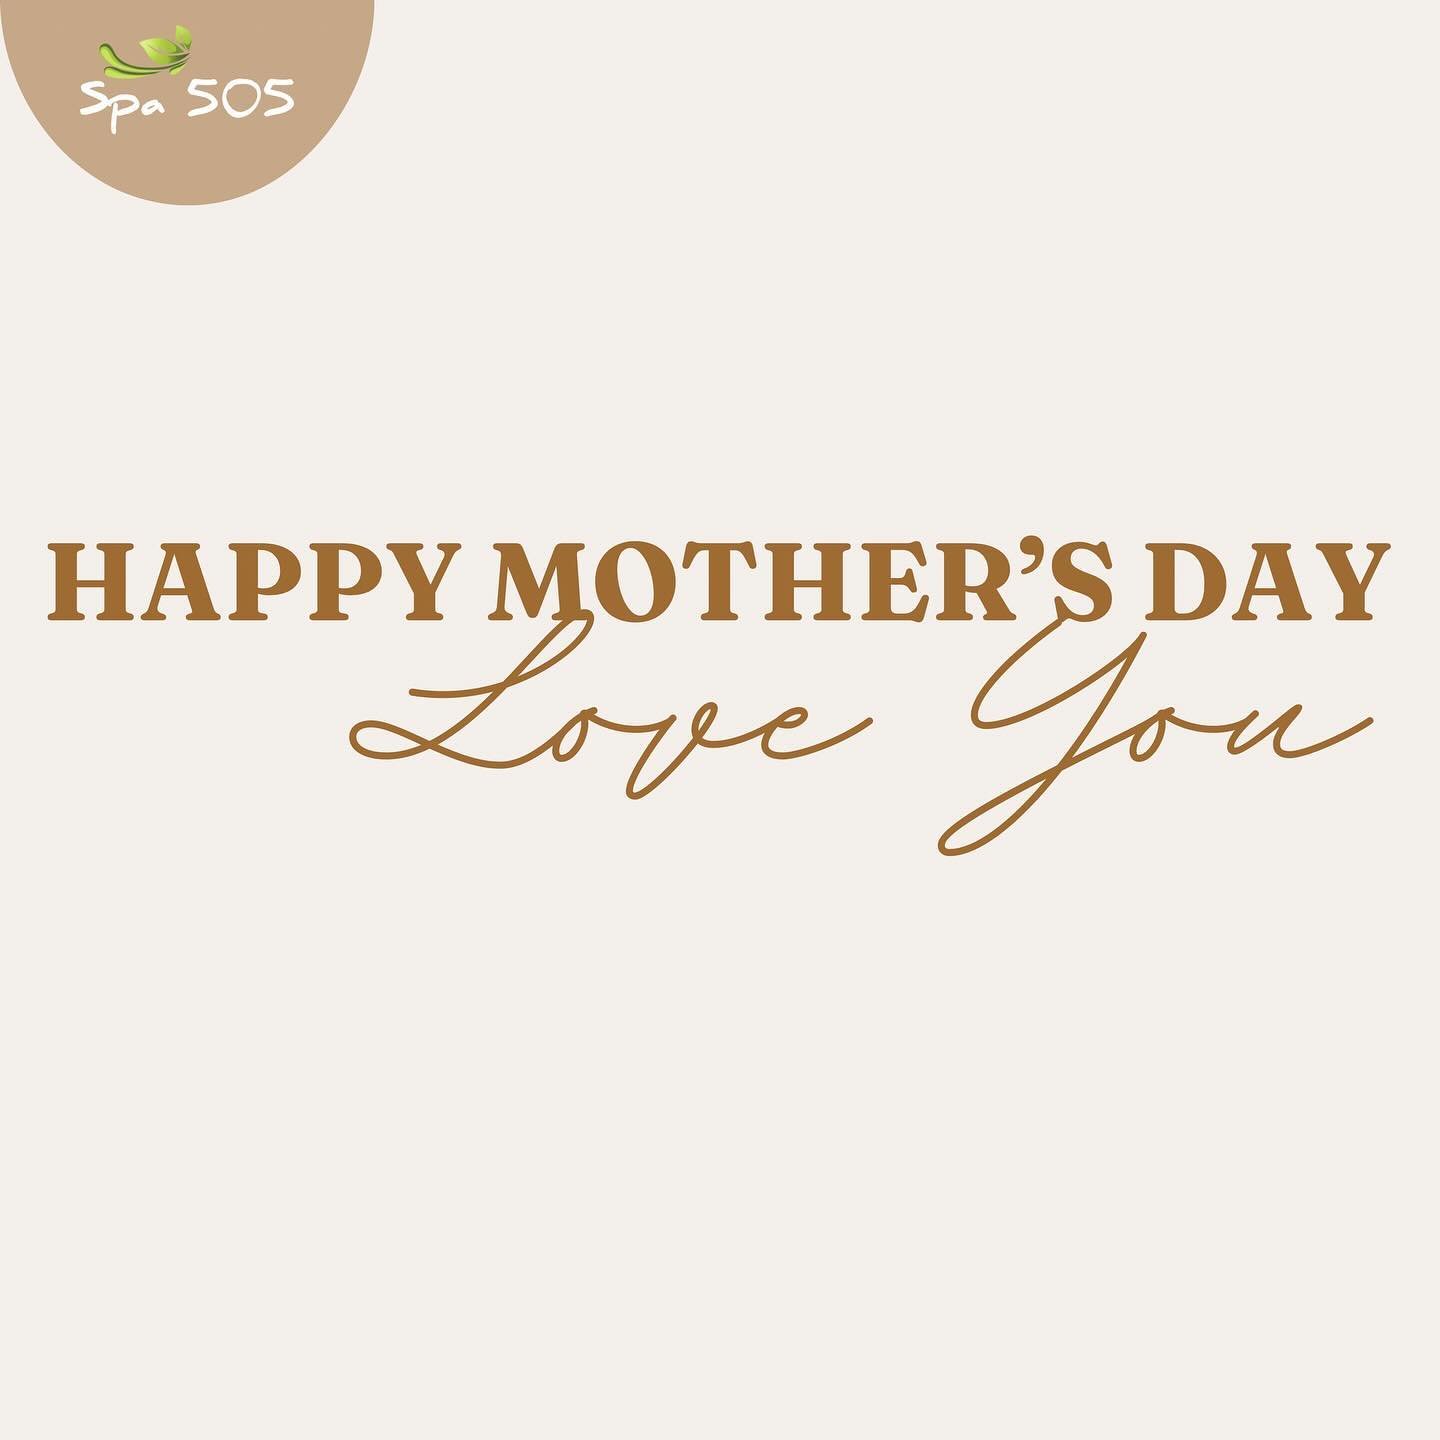 🌷𝐇𝐚𝐩𝐩𝐲 𝐌𝐨𝐭𝐡𝐞𝐫'𝐬 𝐃𝐚𝐲

🤍Here's to the one who taught us love, kindness, and strength. Happy Mother's Day to the guiding light in our lives!

🤍Visit Spa 505 in New York and treat your Mom to the best life she deserves!

&bull;&bull;&bu